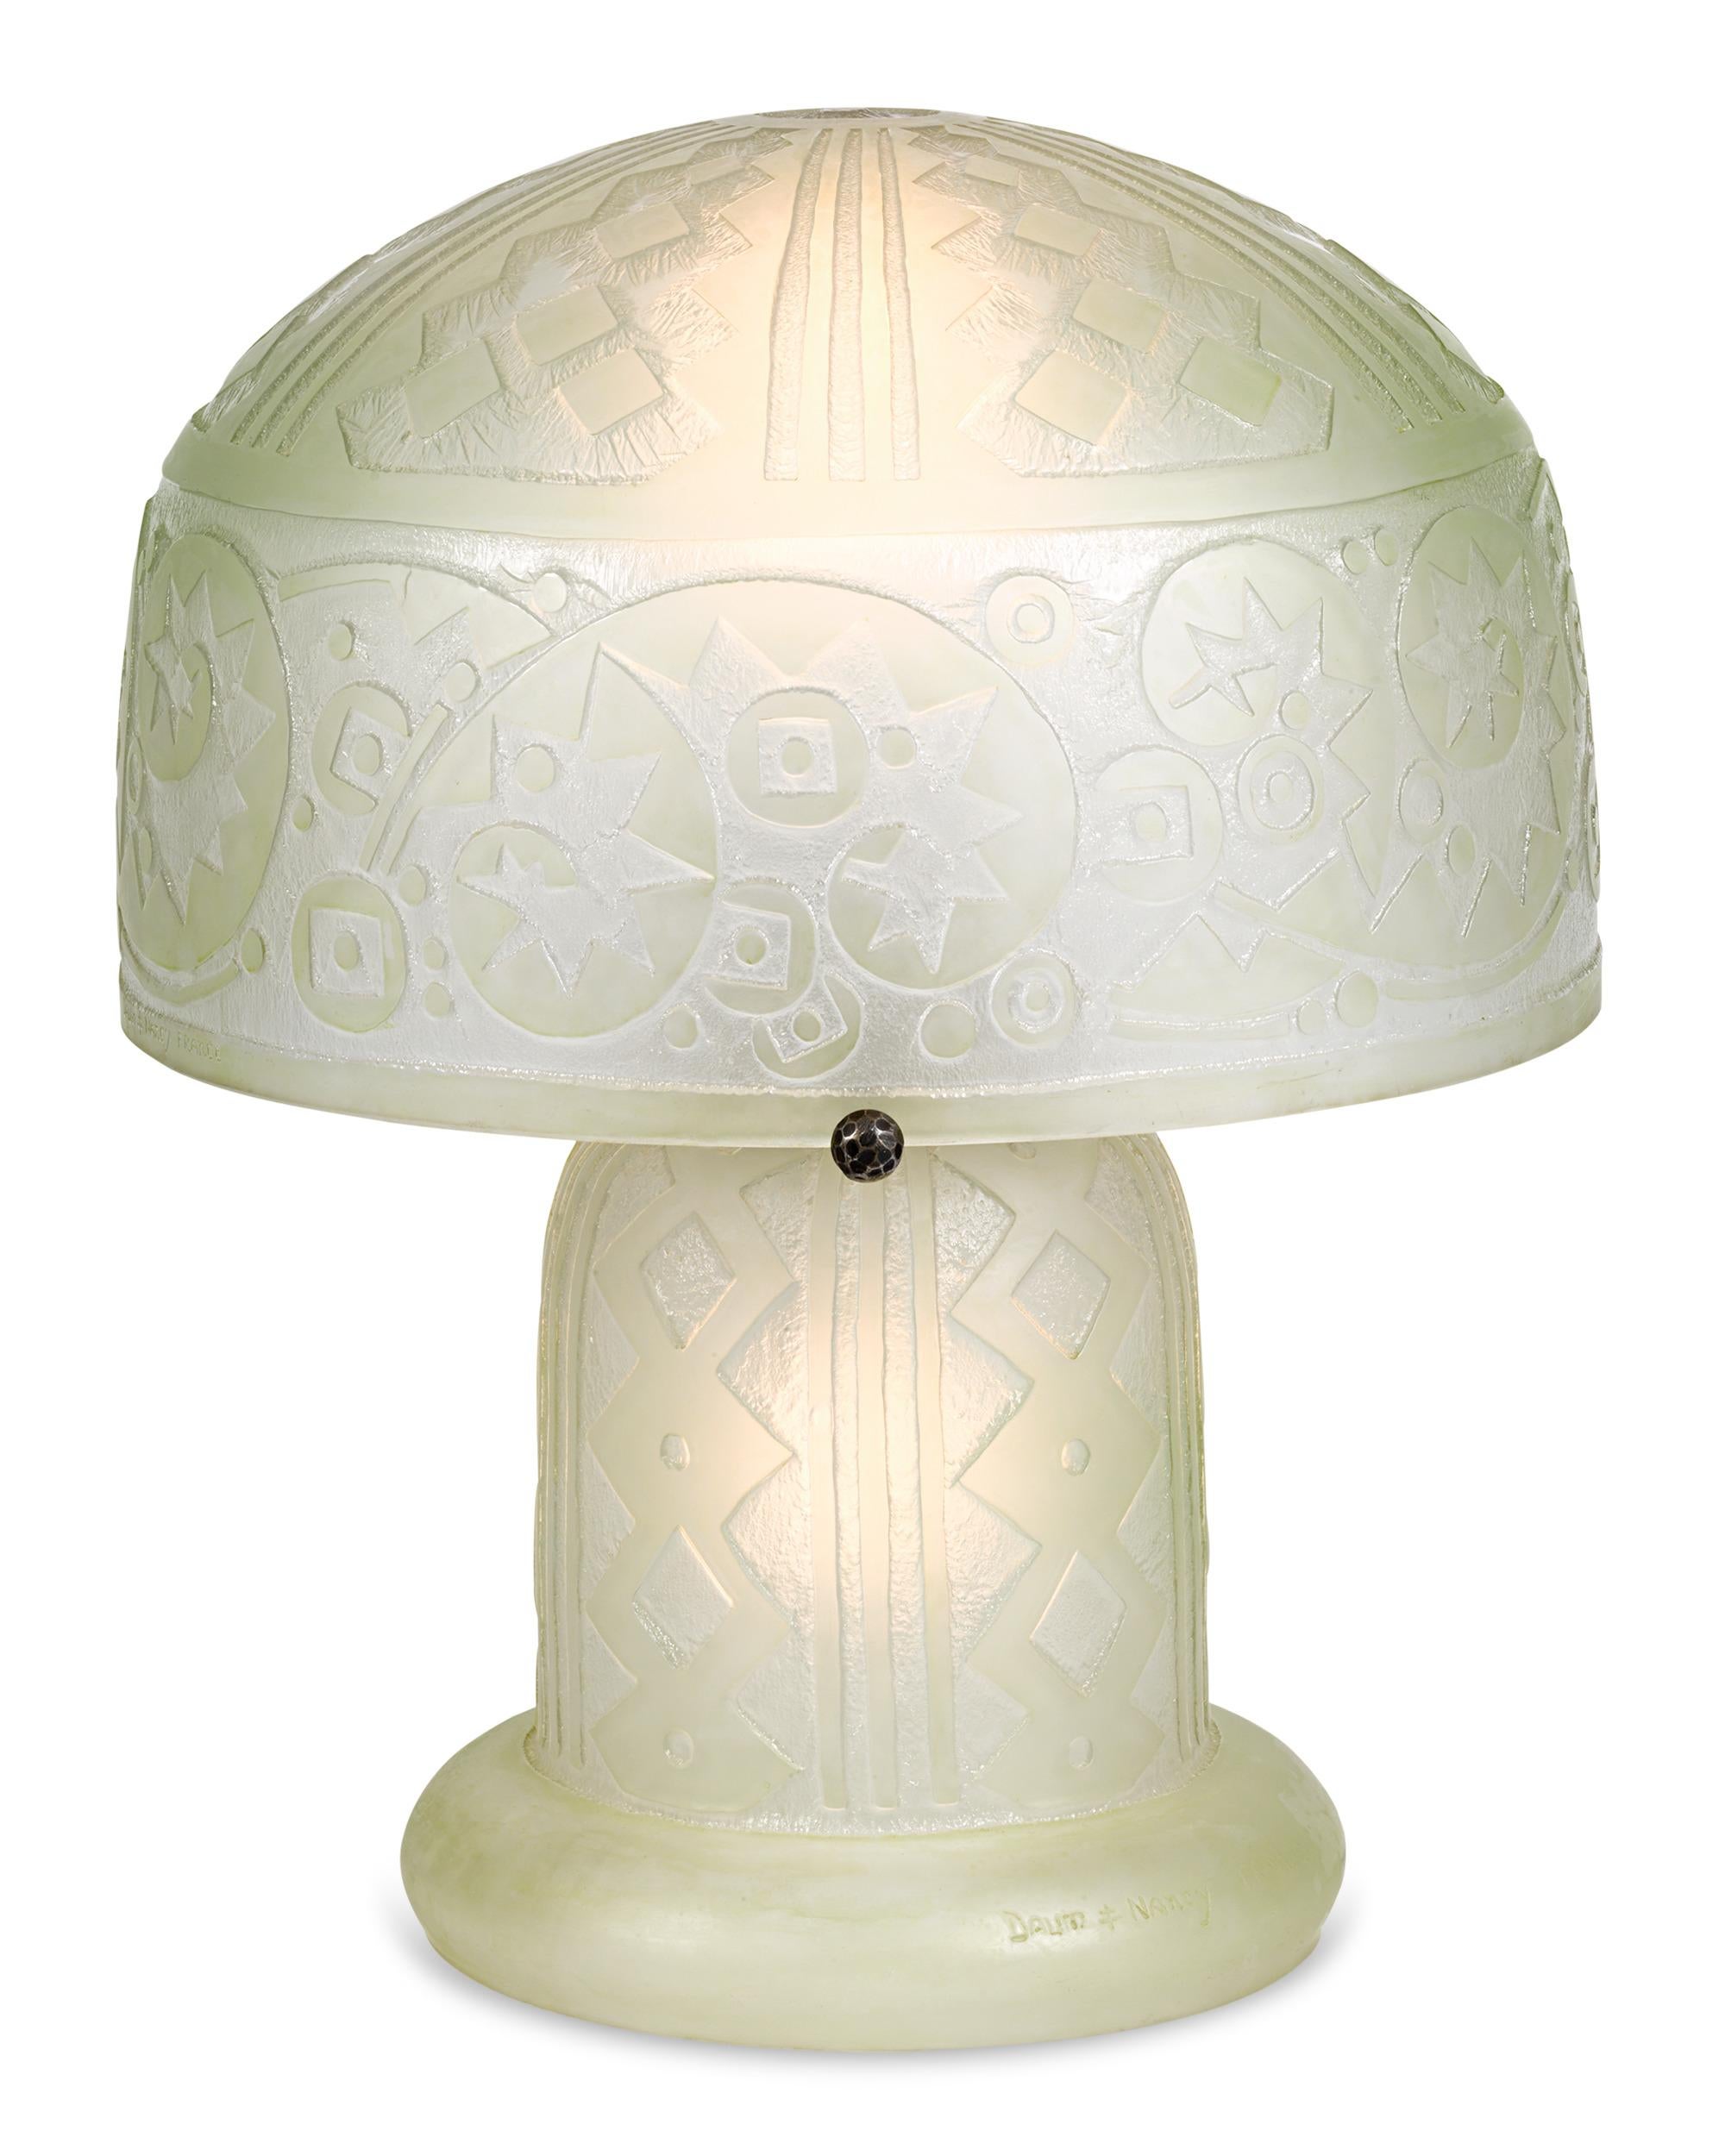 Exemplary of the finest in Art Deco glass design, this acid-etched table lamp is handcrafted by the pioneering glassmaker Daum Nancy. The thick glass of both the upper shade is heavily ornamented with stylized, geometric forms, accented by handmade